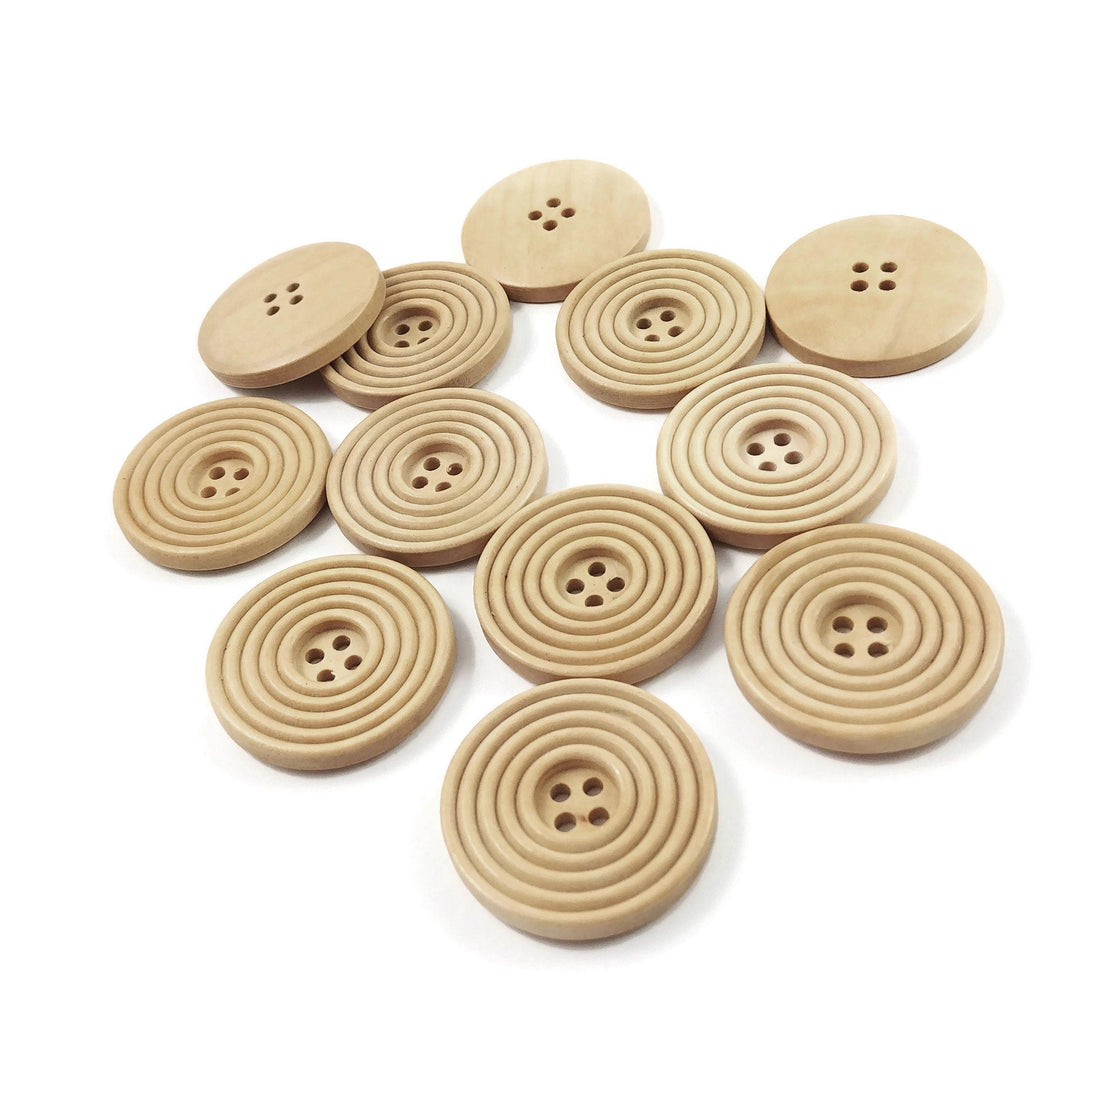 Wooden sewing buttons 30mm - set of 6 natural circle wood button